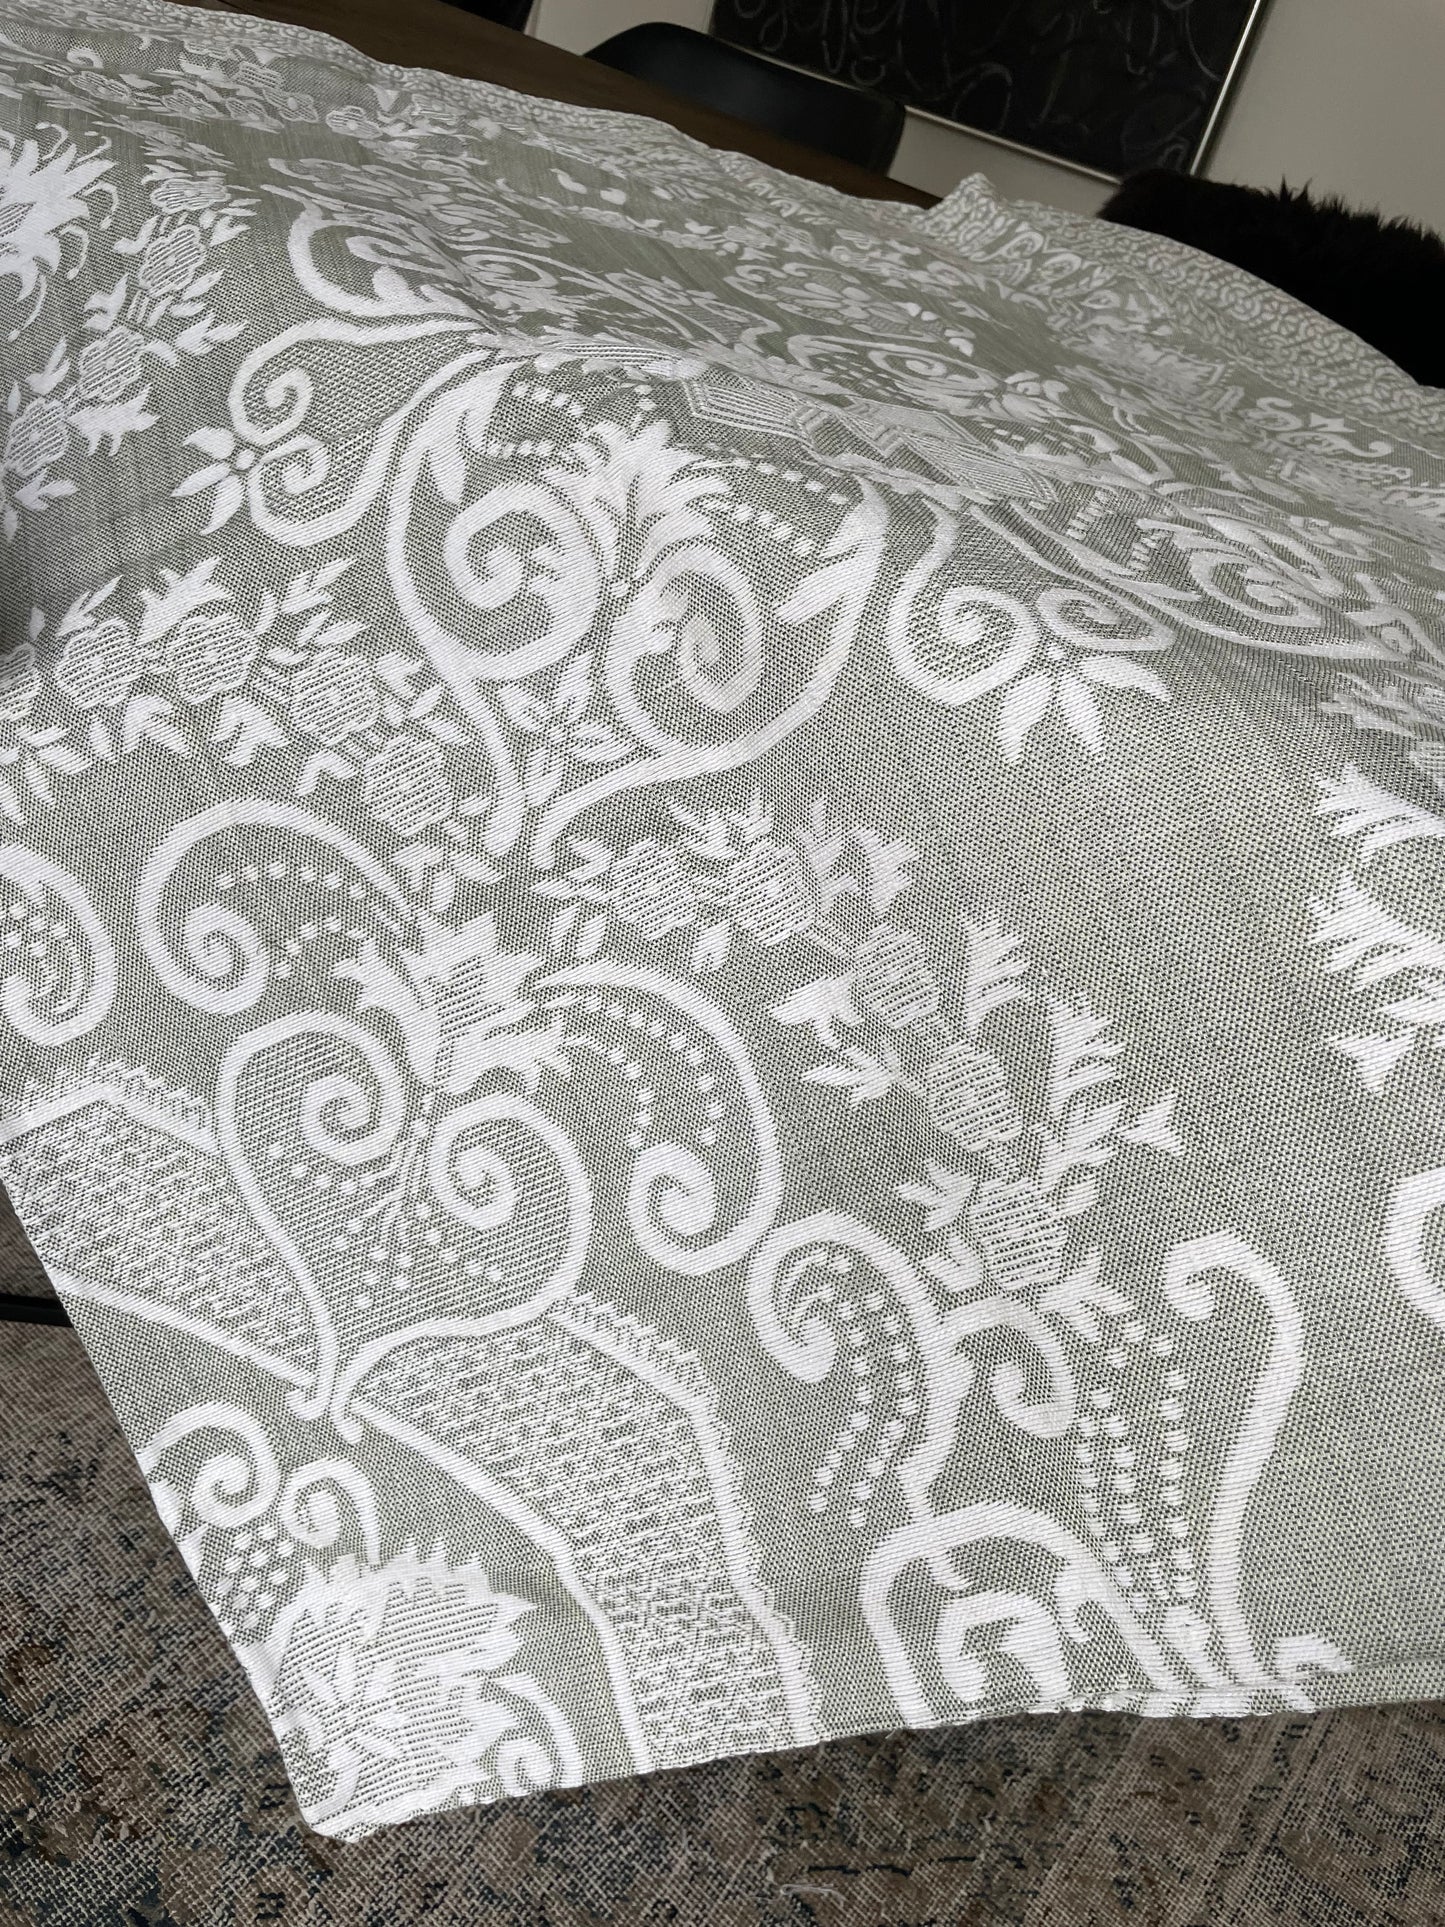 Bedspreads with damask weave in locally harvested cotton. Fair Trade from Afghanistan